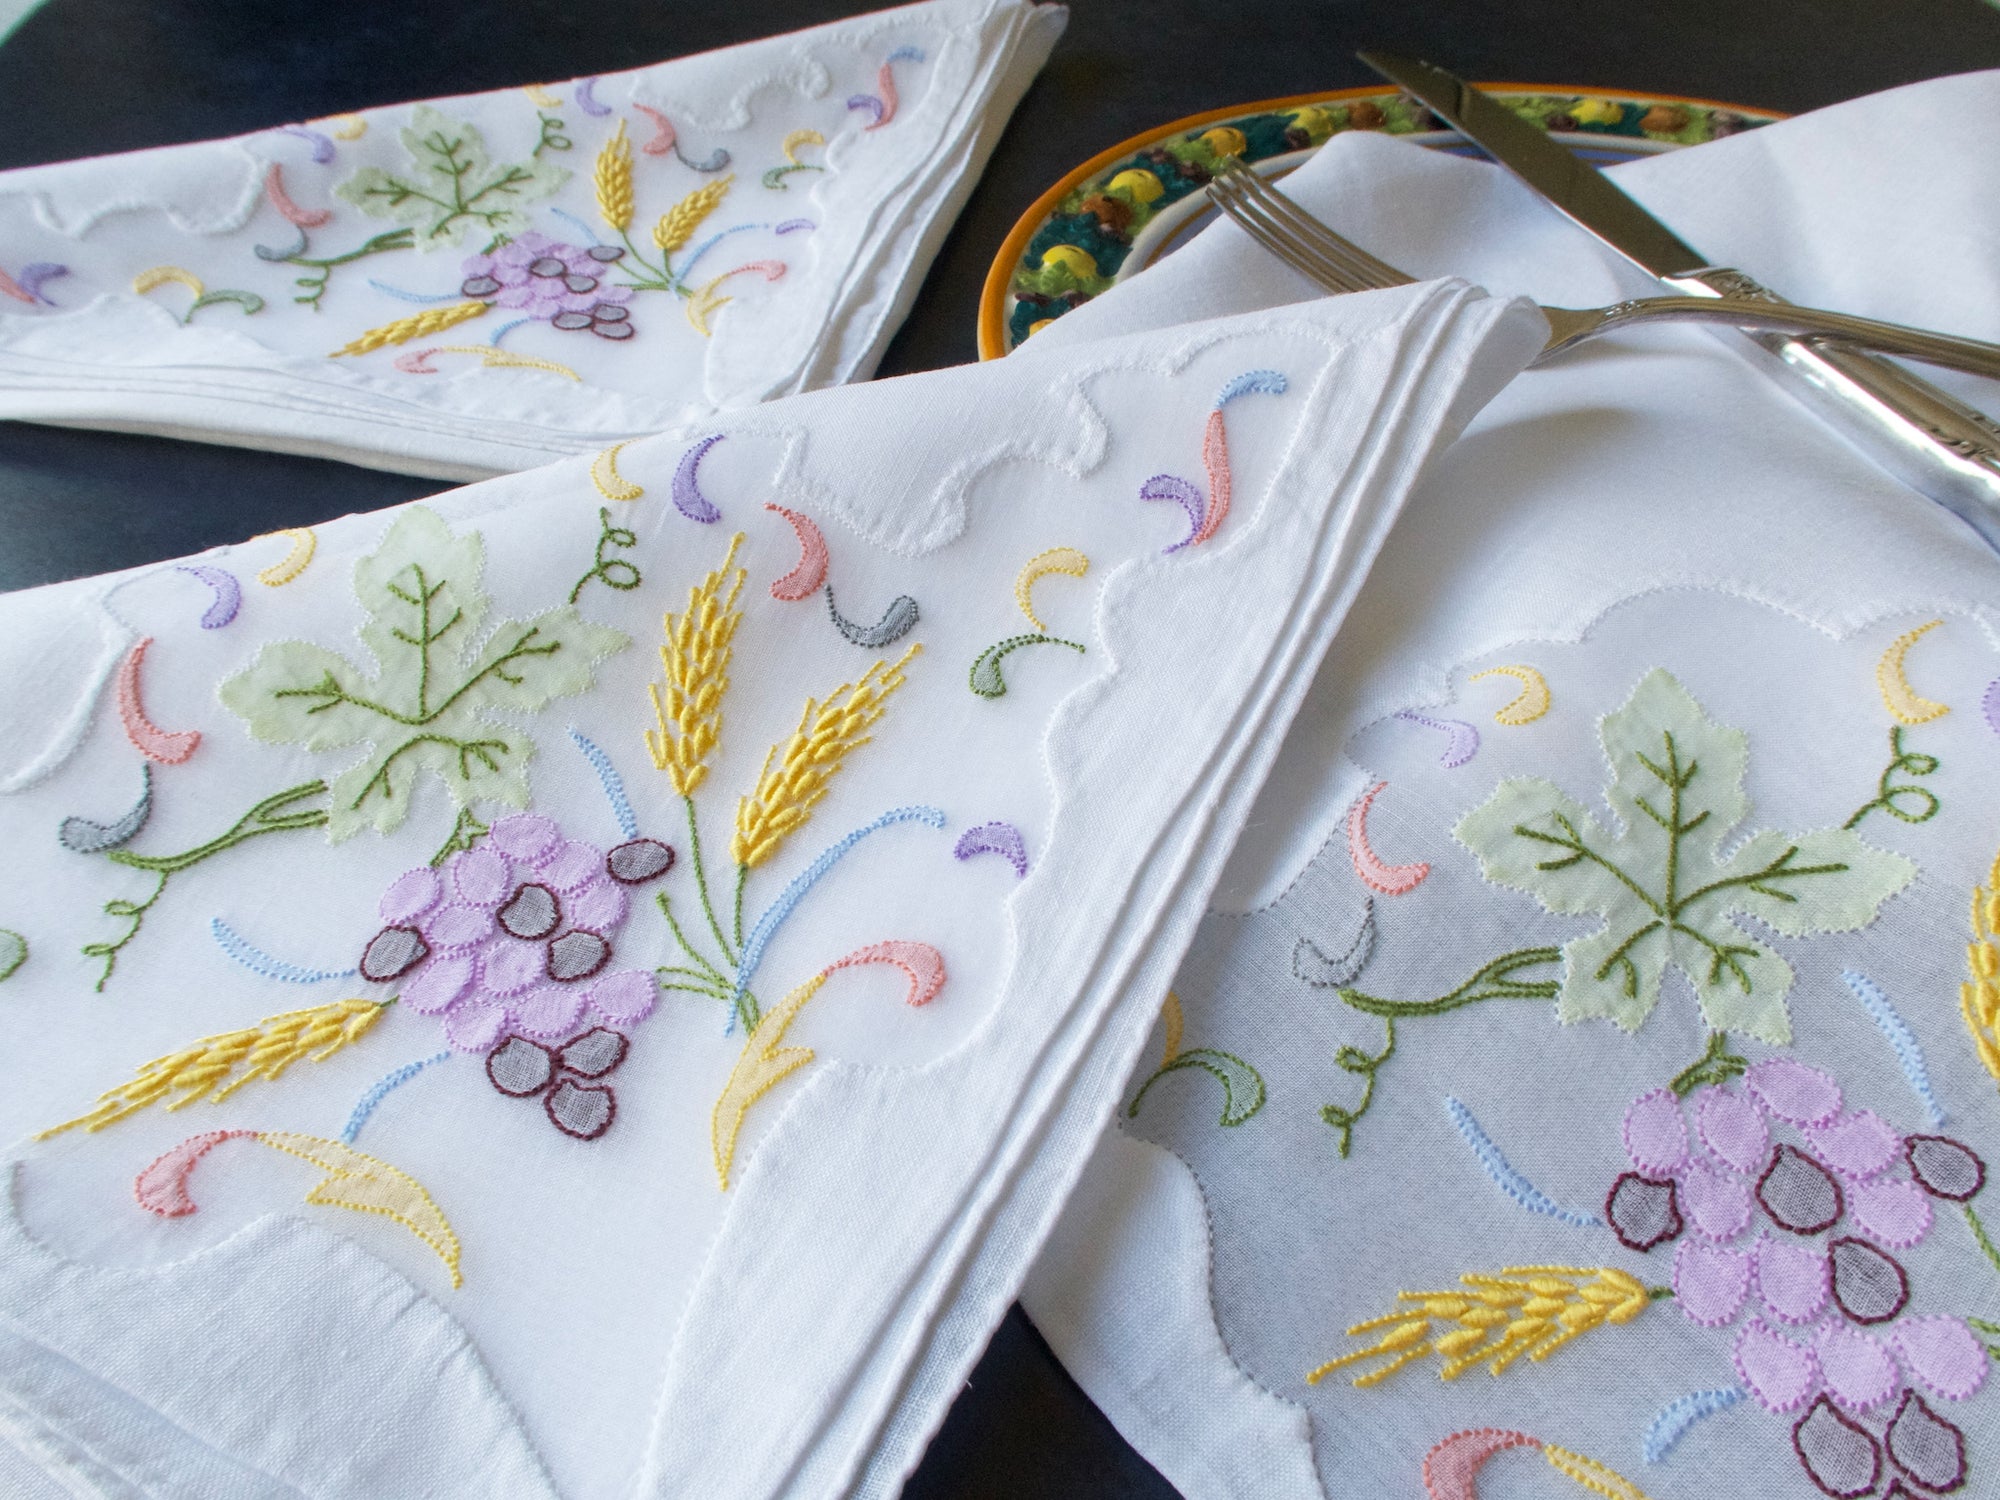 Grapes and Wheat Vintage Embroidered Dinner Napkins, Set of 12